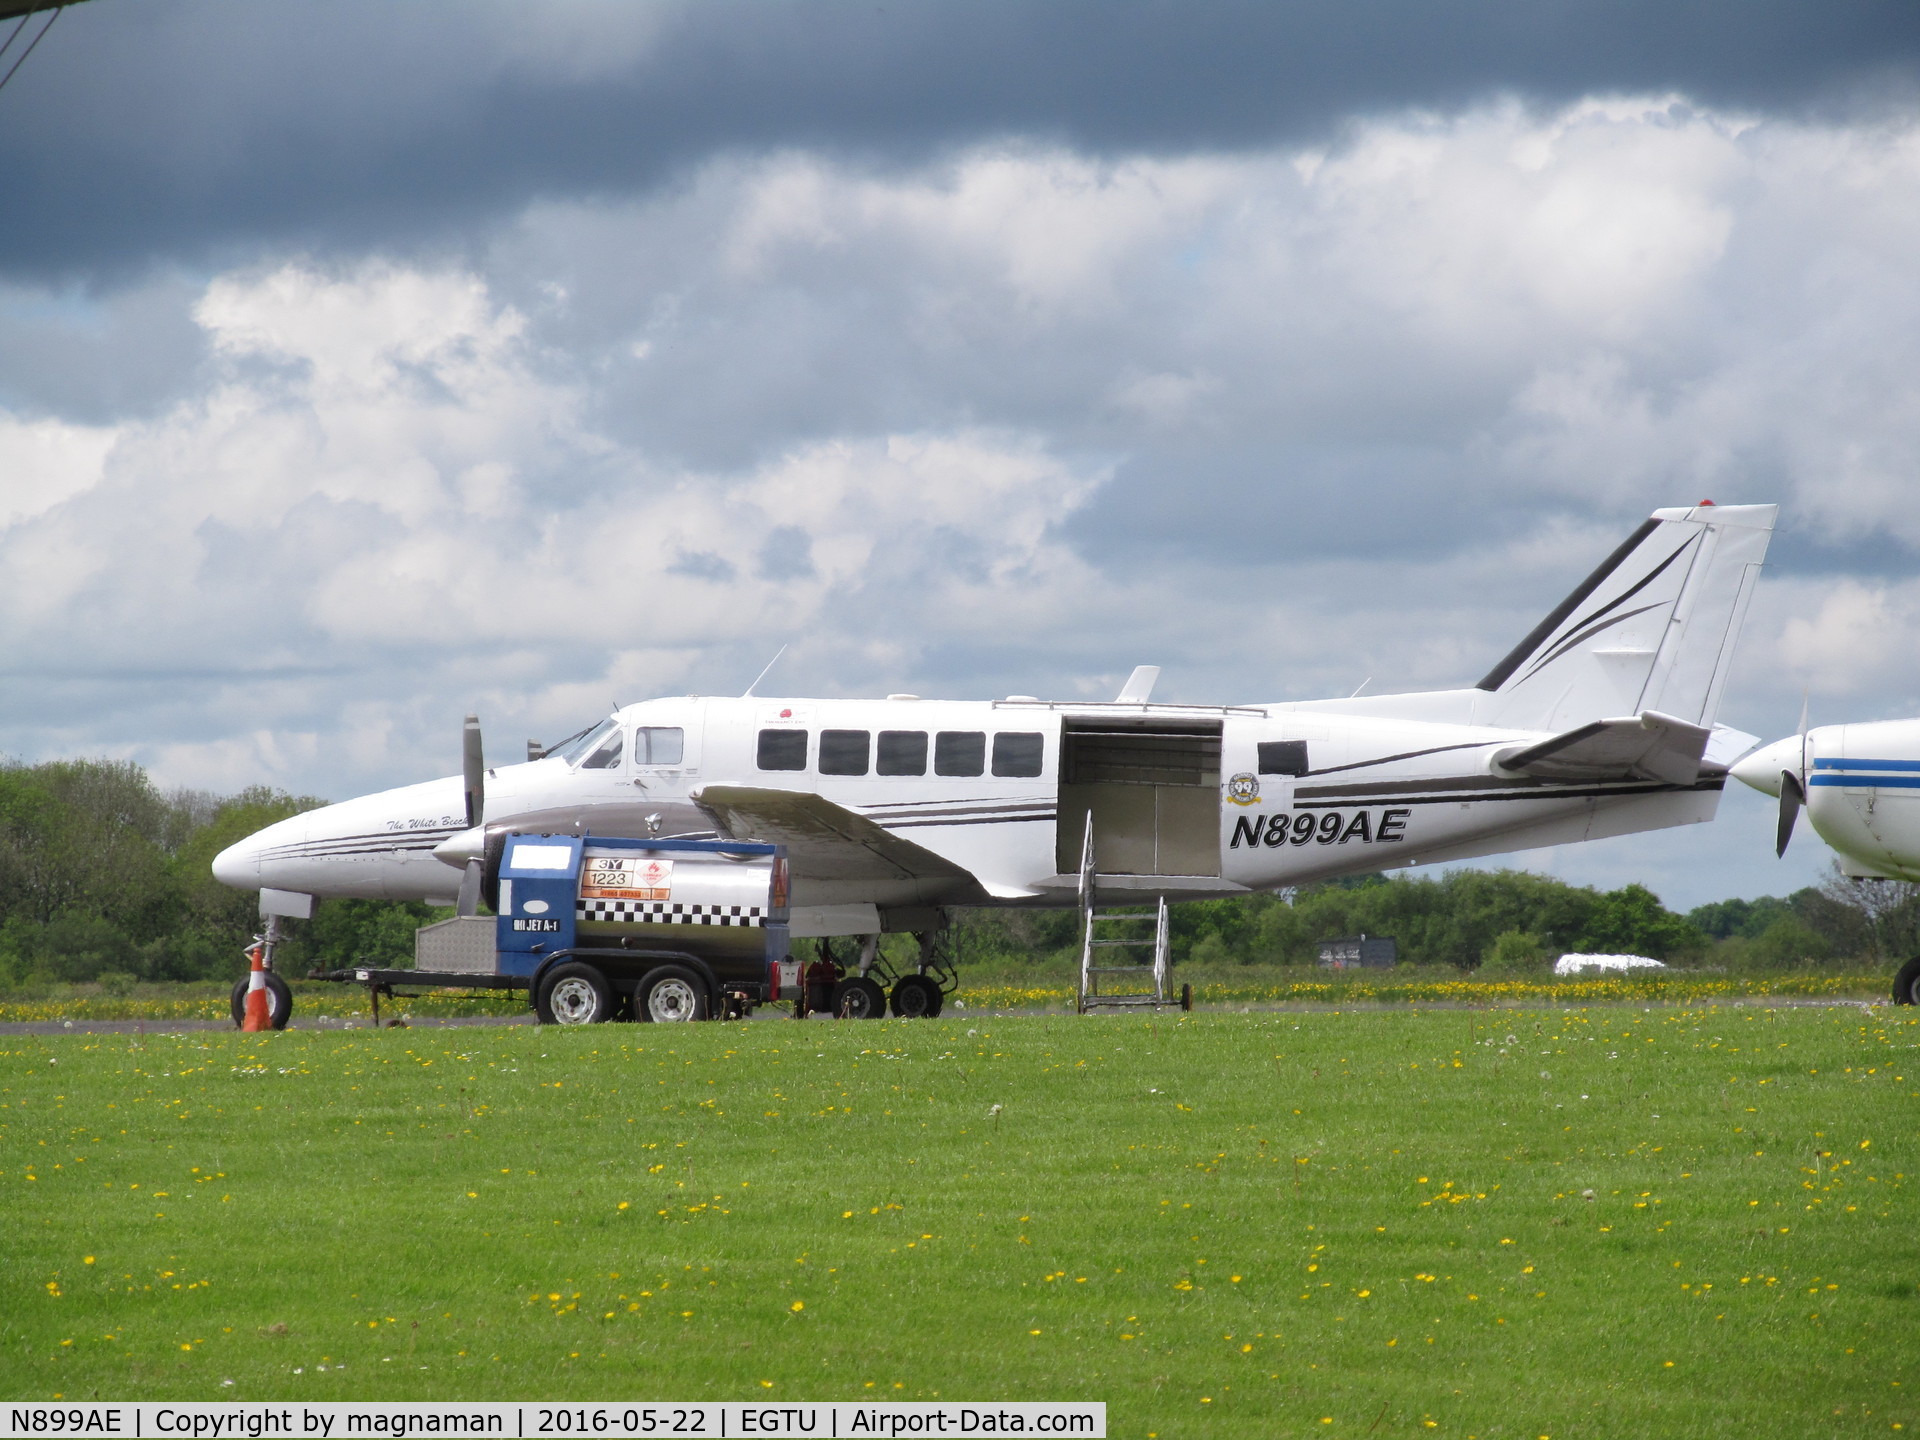 N899AE, 1968 Beech 99 C/N U-23, Along with sister N899AG - at dunkeswell today - skydive operations